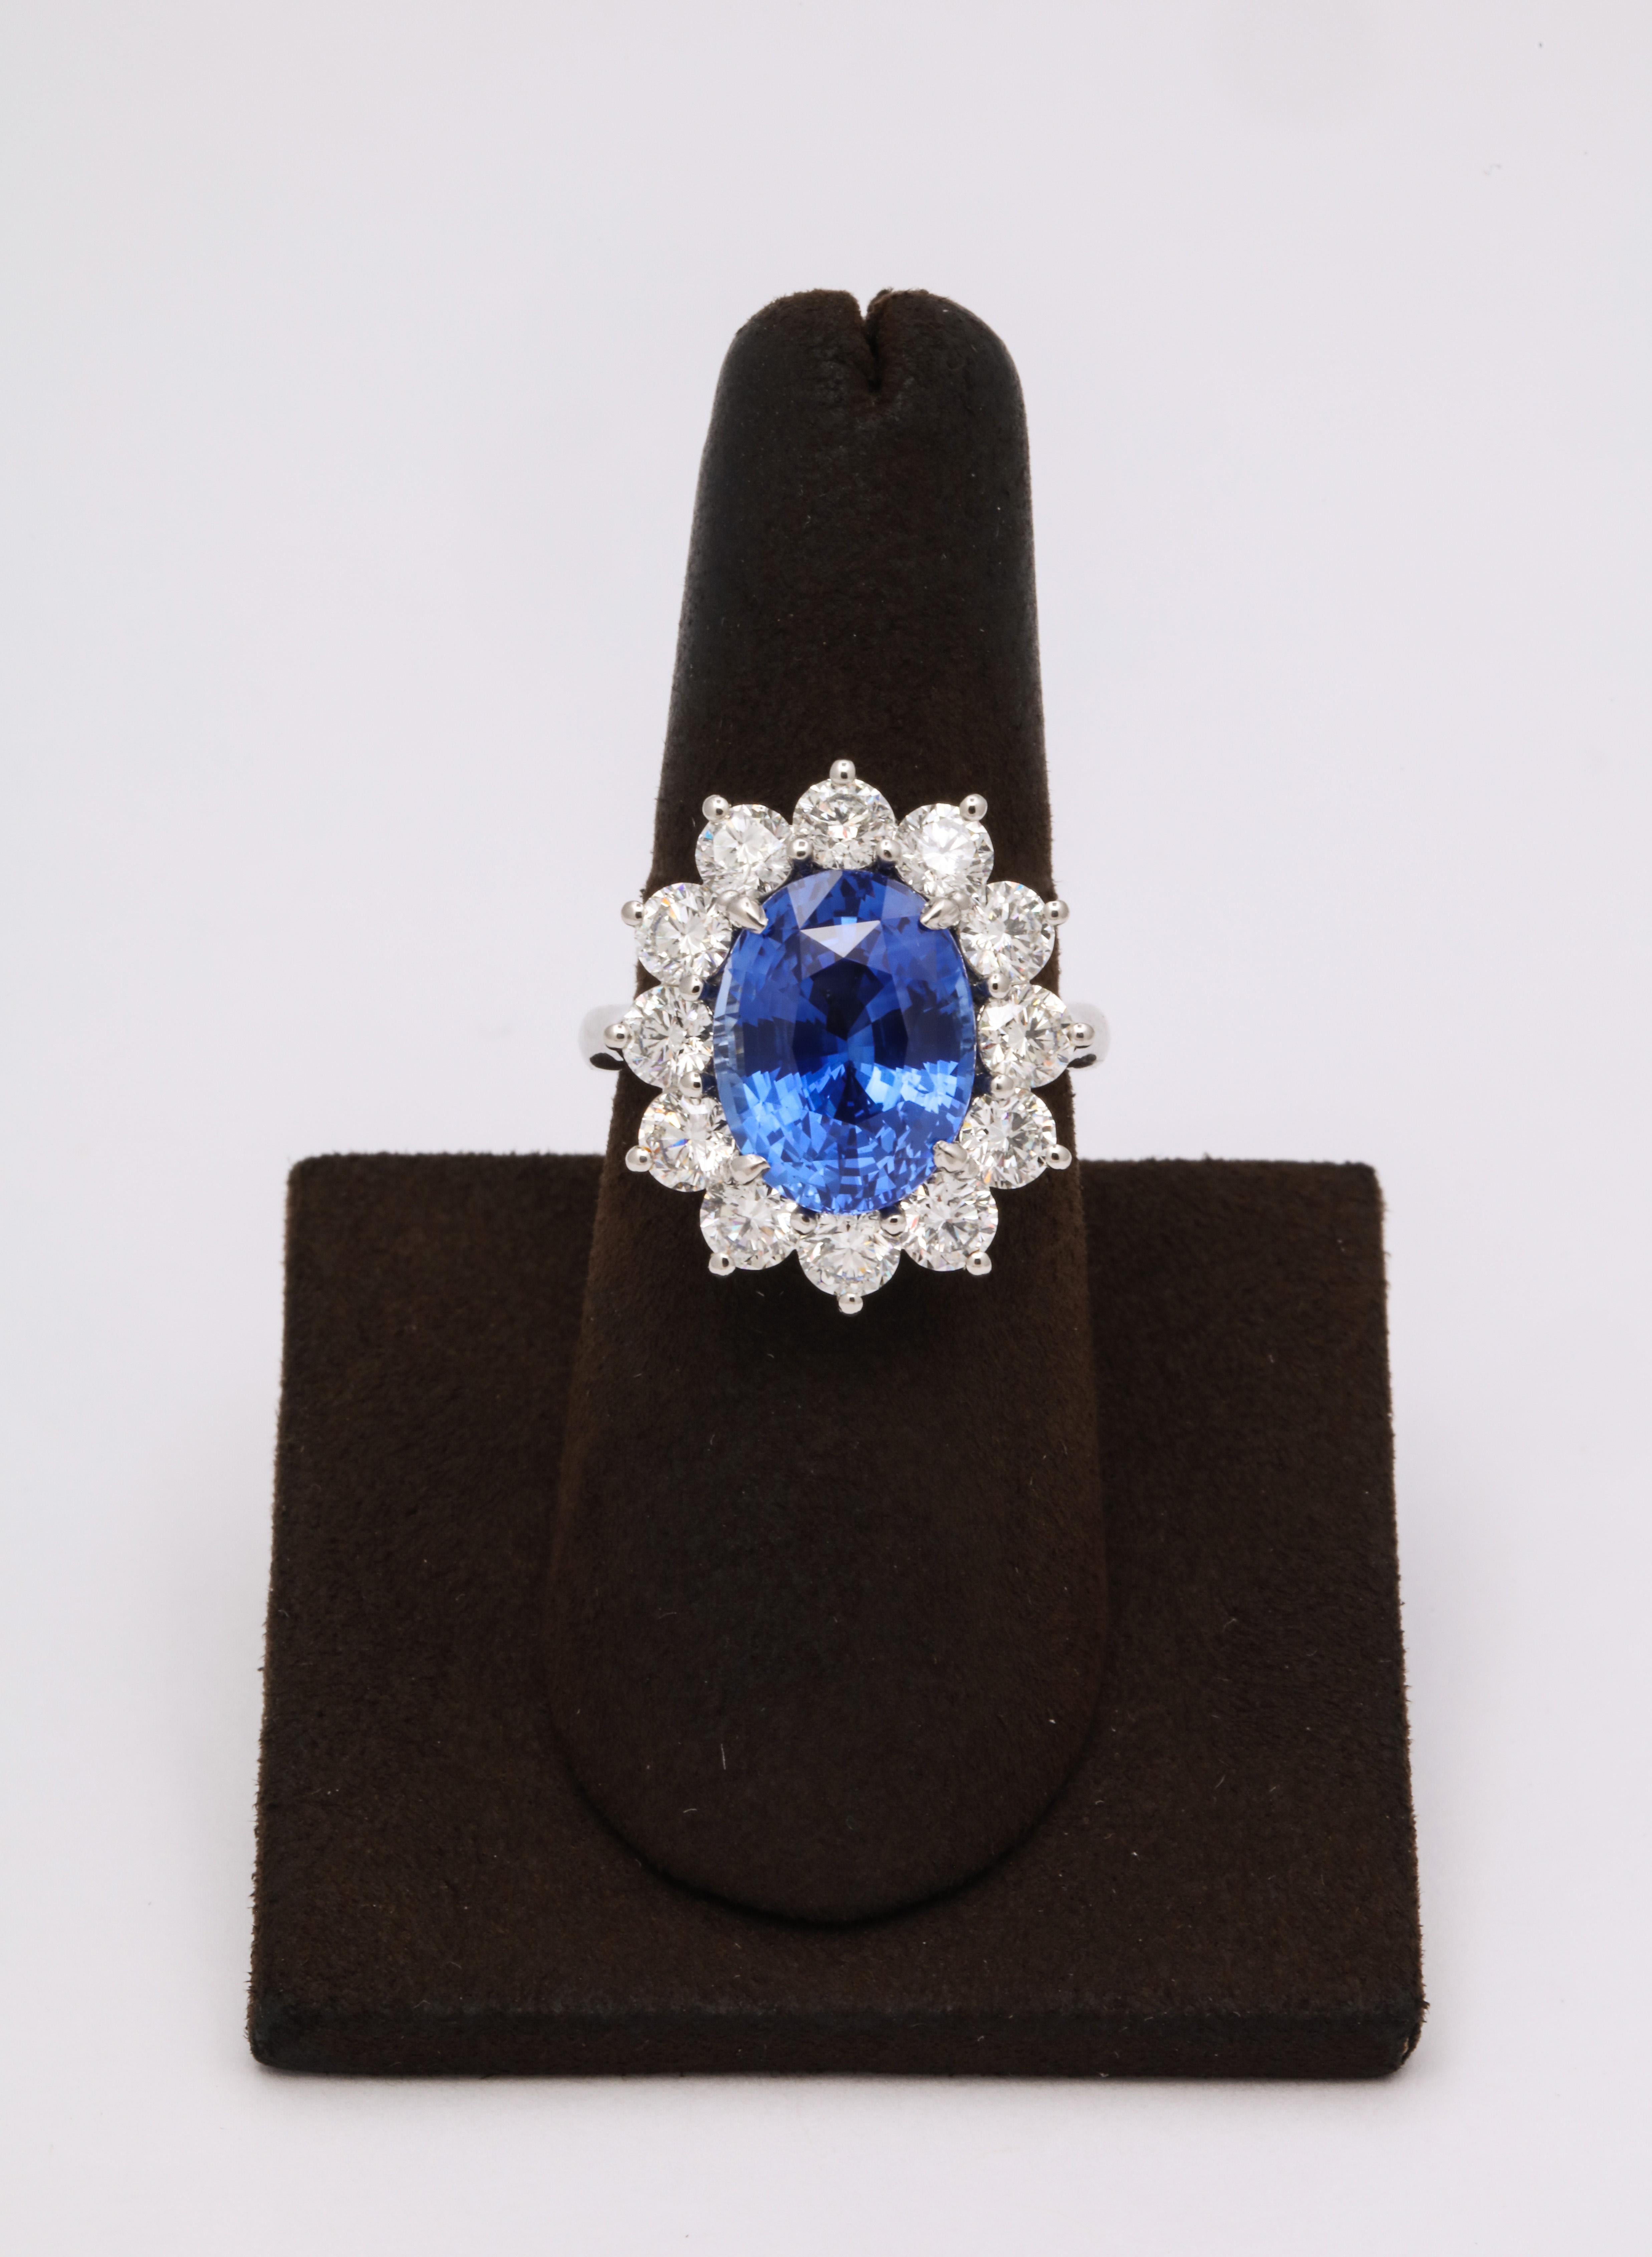 
A STUNNING Ceylon Blue Sapphire set in a custom diamond mounting. 

7.53 carat Ceylon Blue Sapphire  

2.81 carats of white round brilliant cut diamonds

Custom platinum mounting 

The ring is currently a size 7 but can easily be sized to any